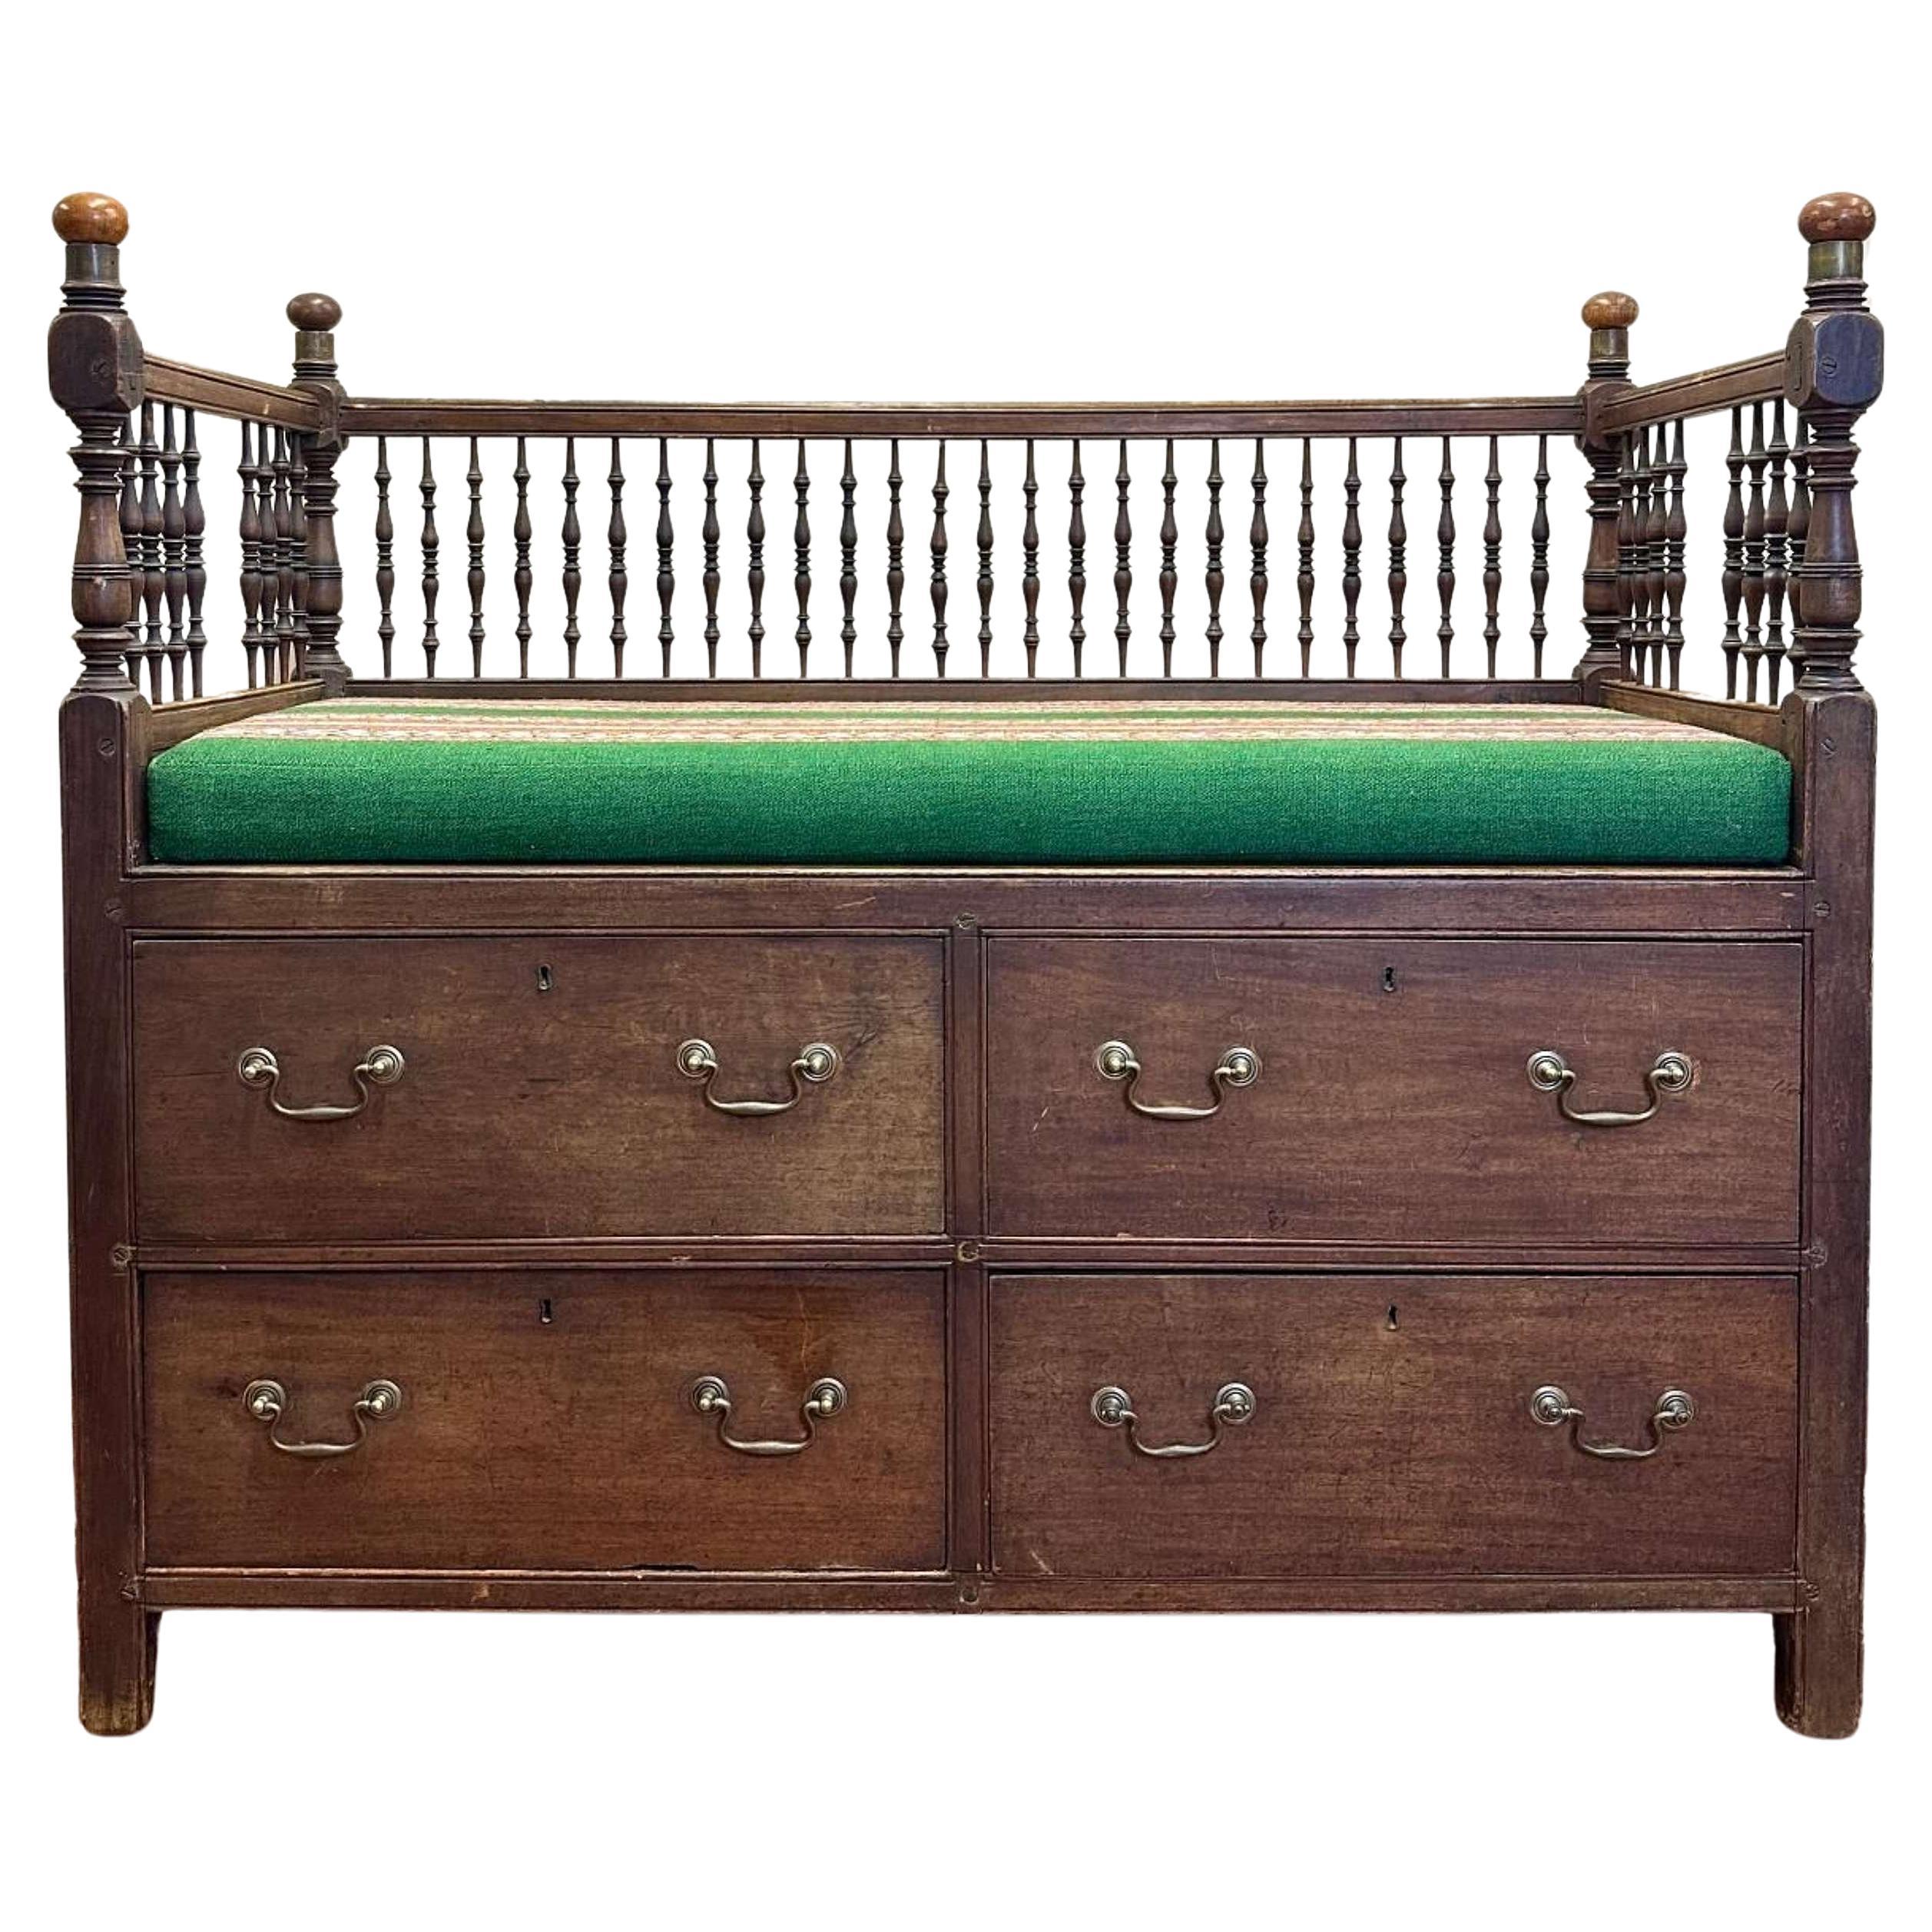 19th Century Anglo Indian Campaign Settle Bench 